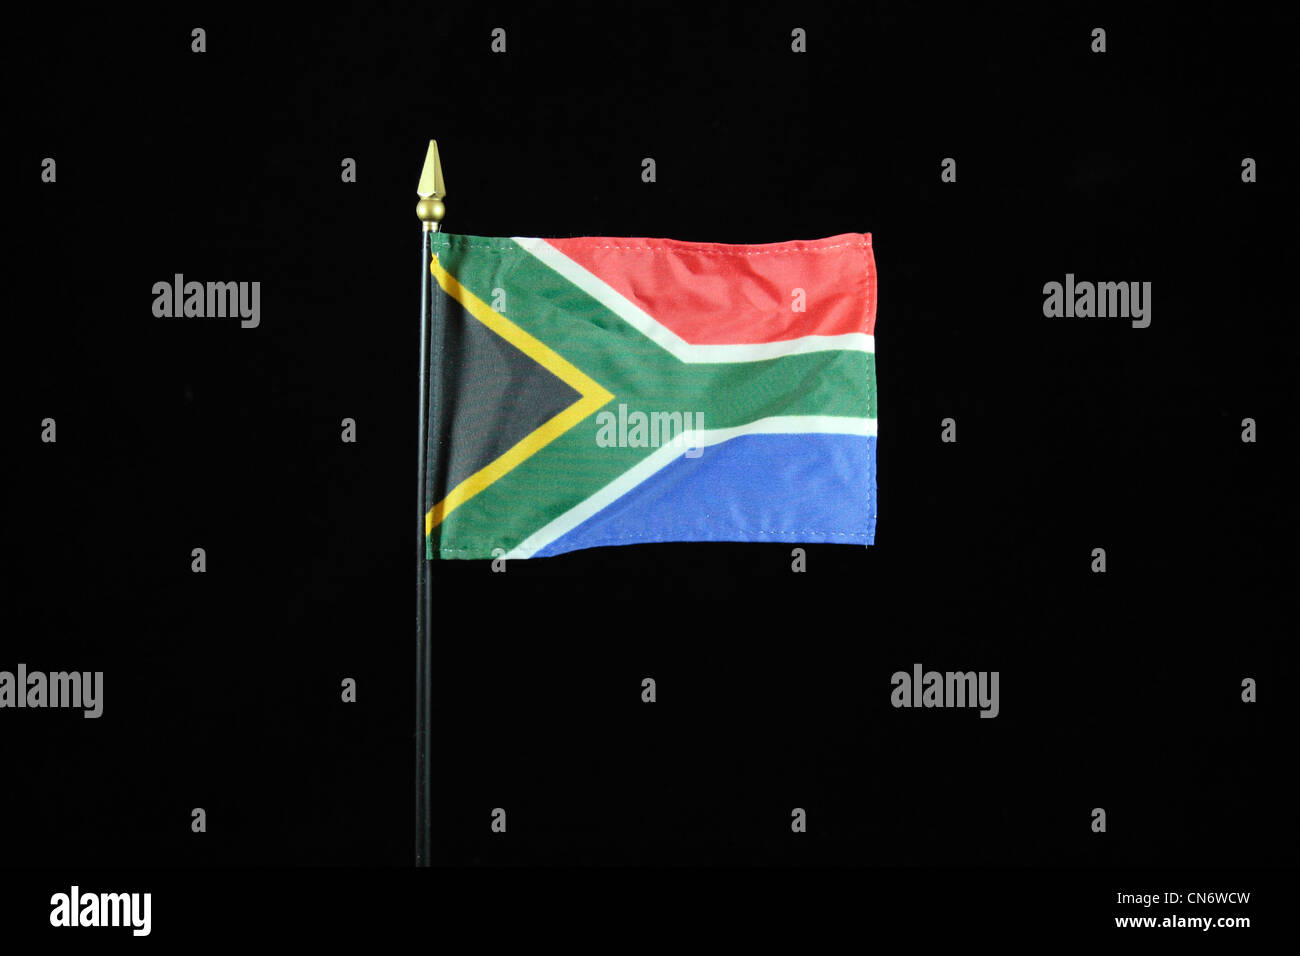 The national flag of the Republic of South Africa on a black background. Stock Photo